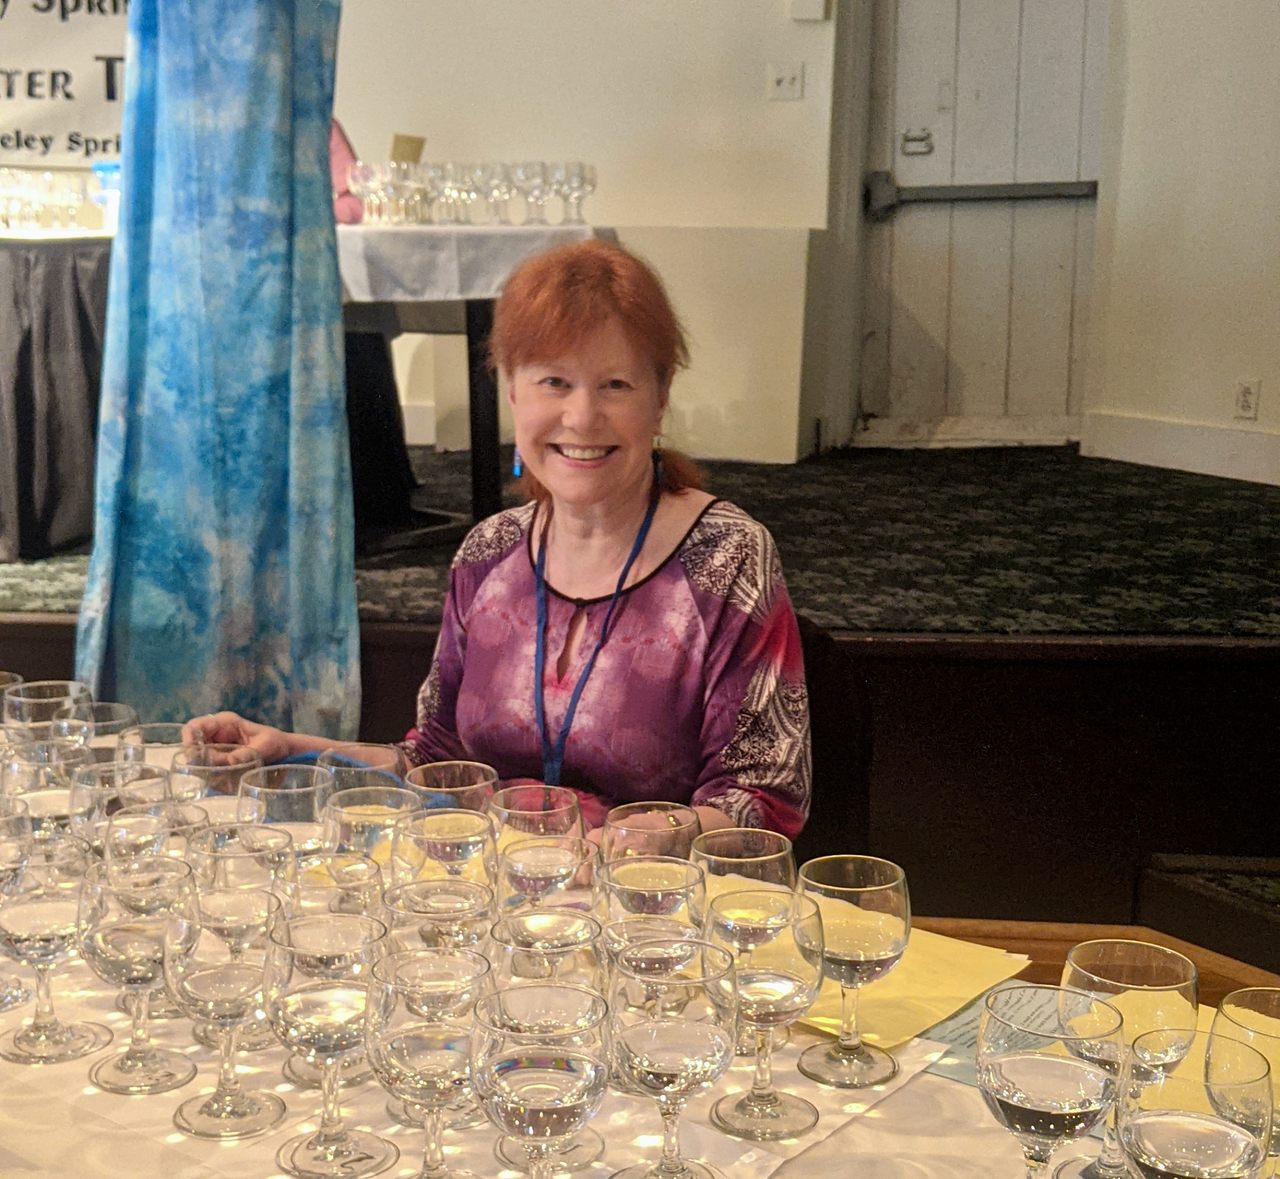 The author preps for the tasting.